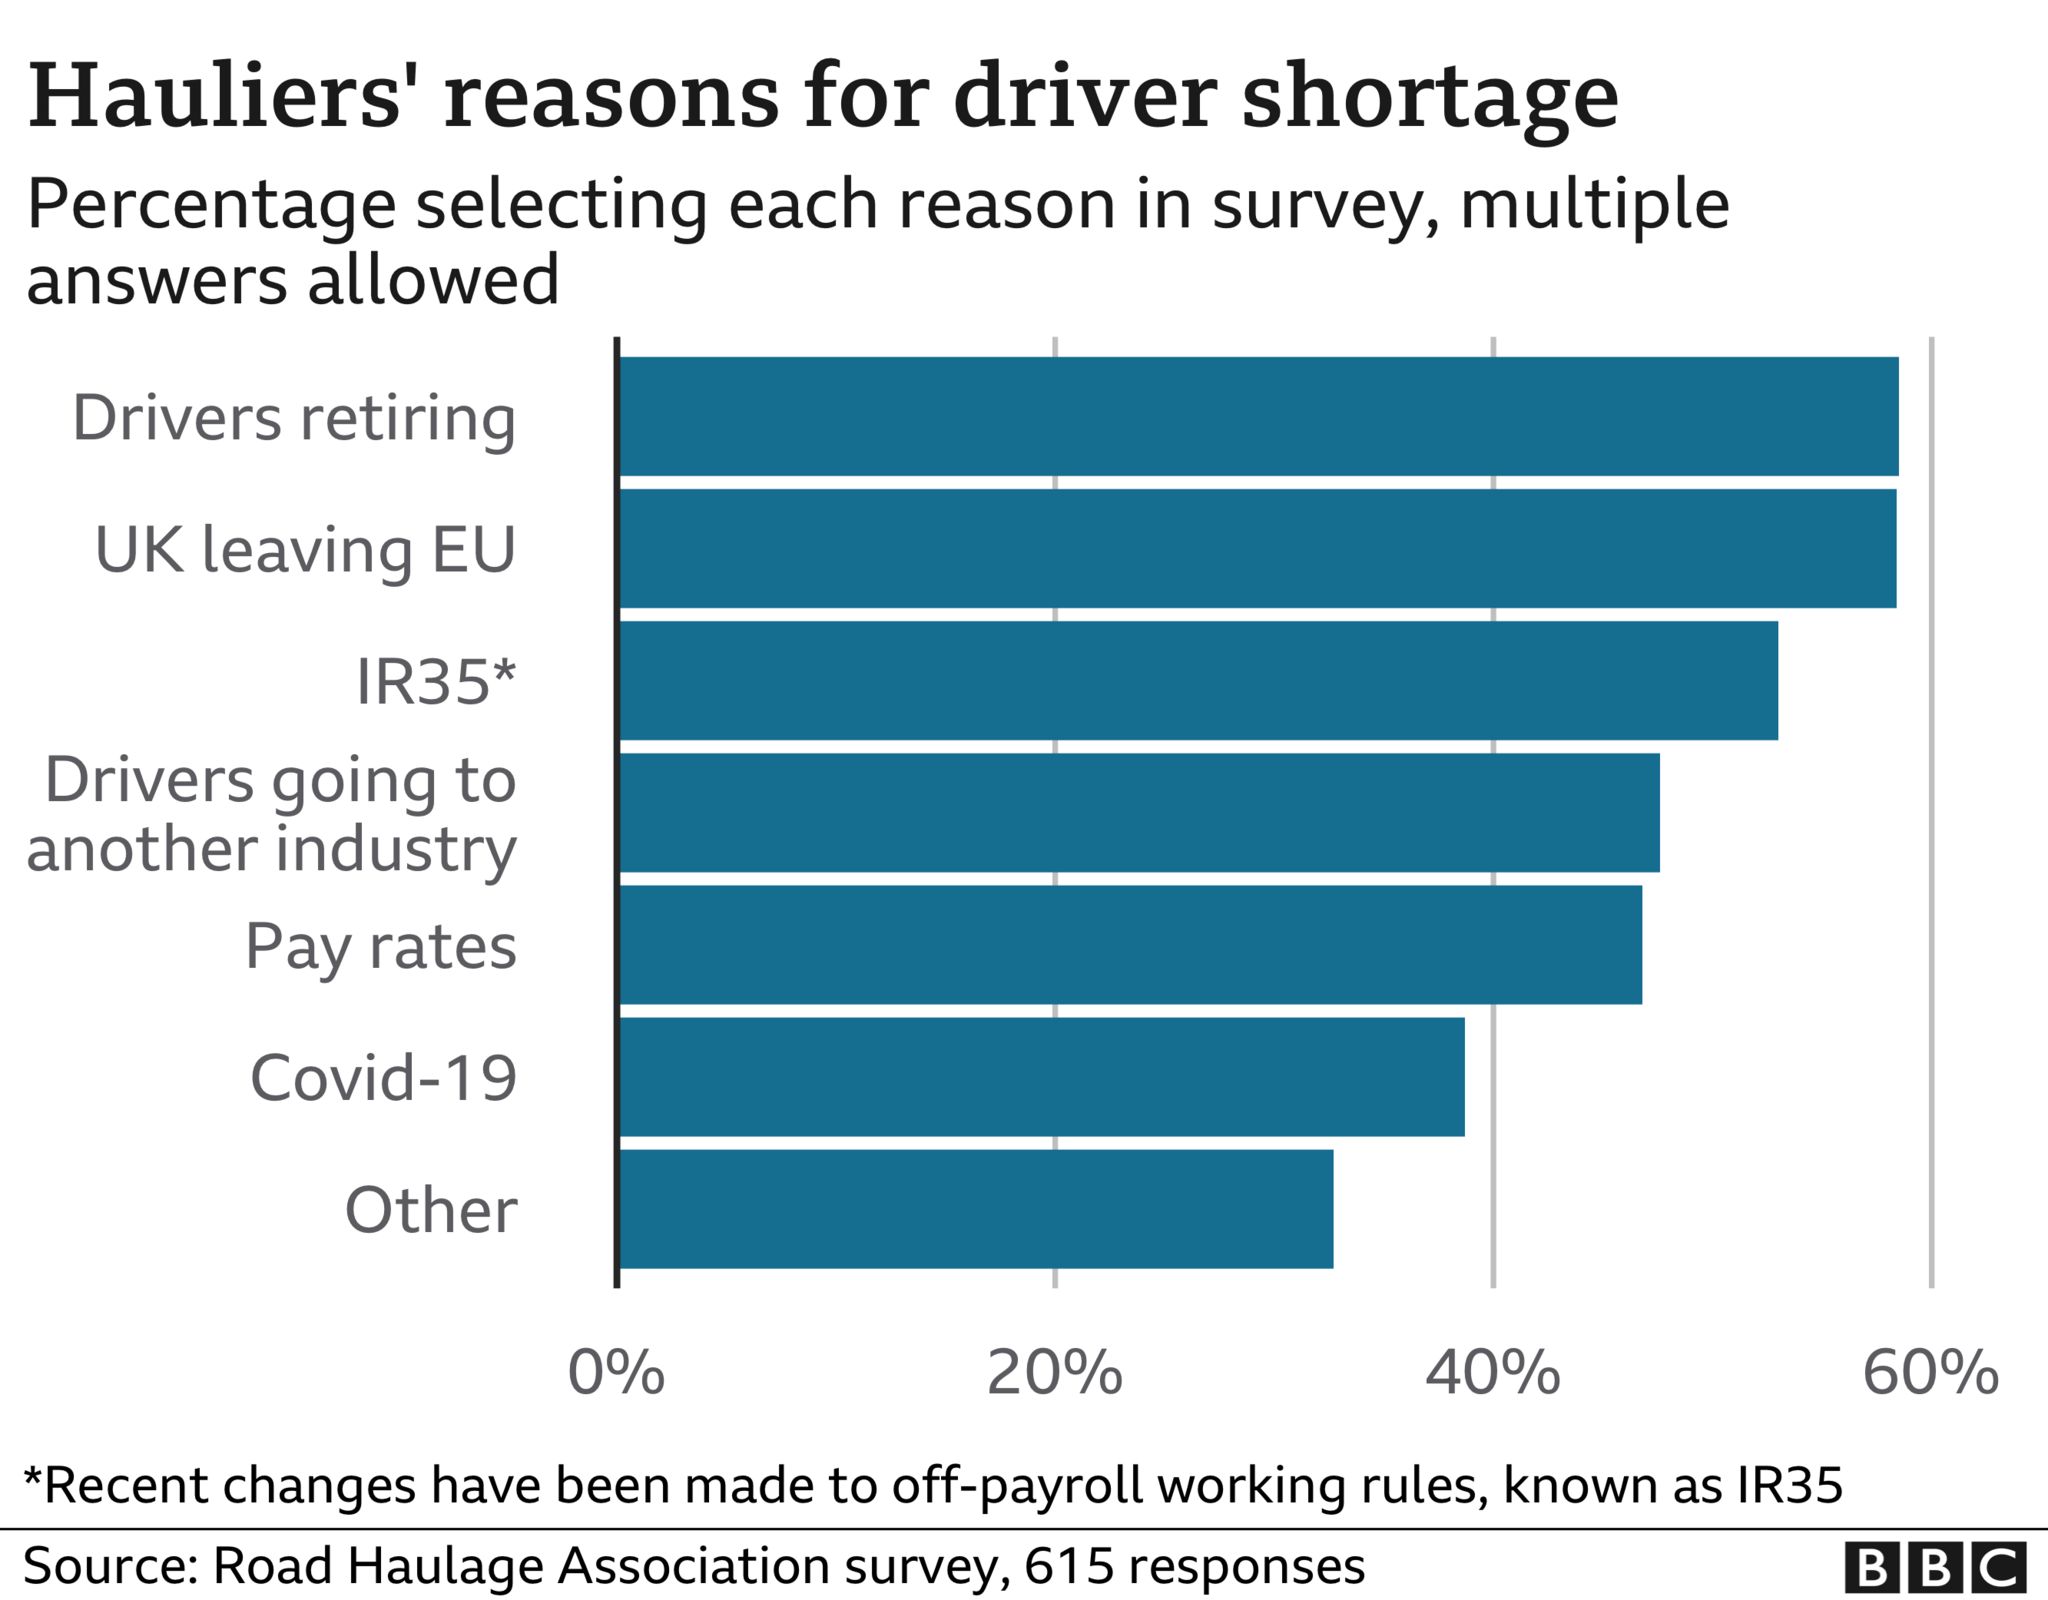 Survey findings about why there are driver shortages